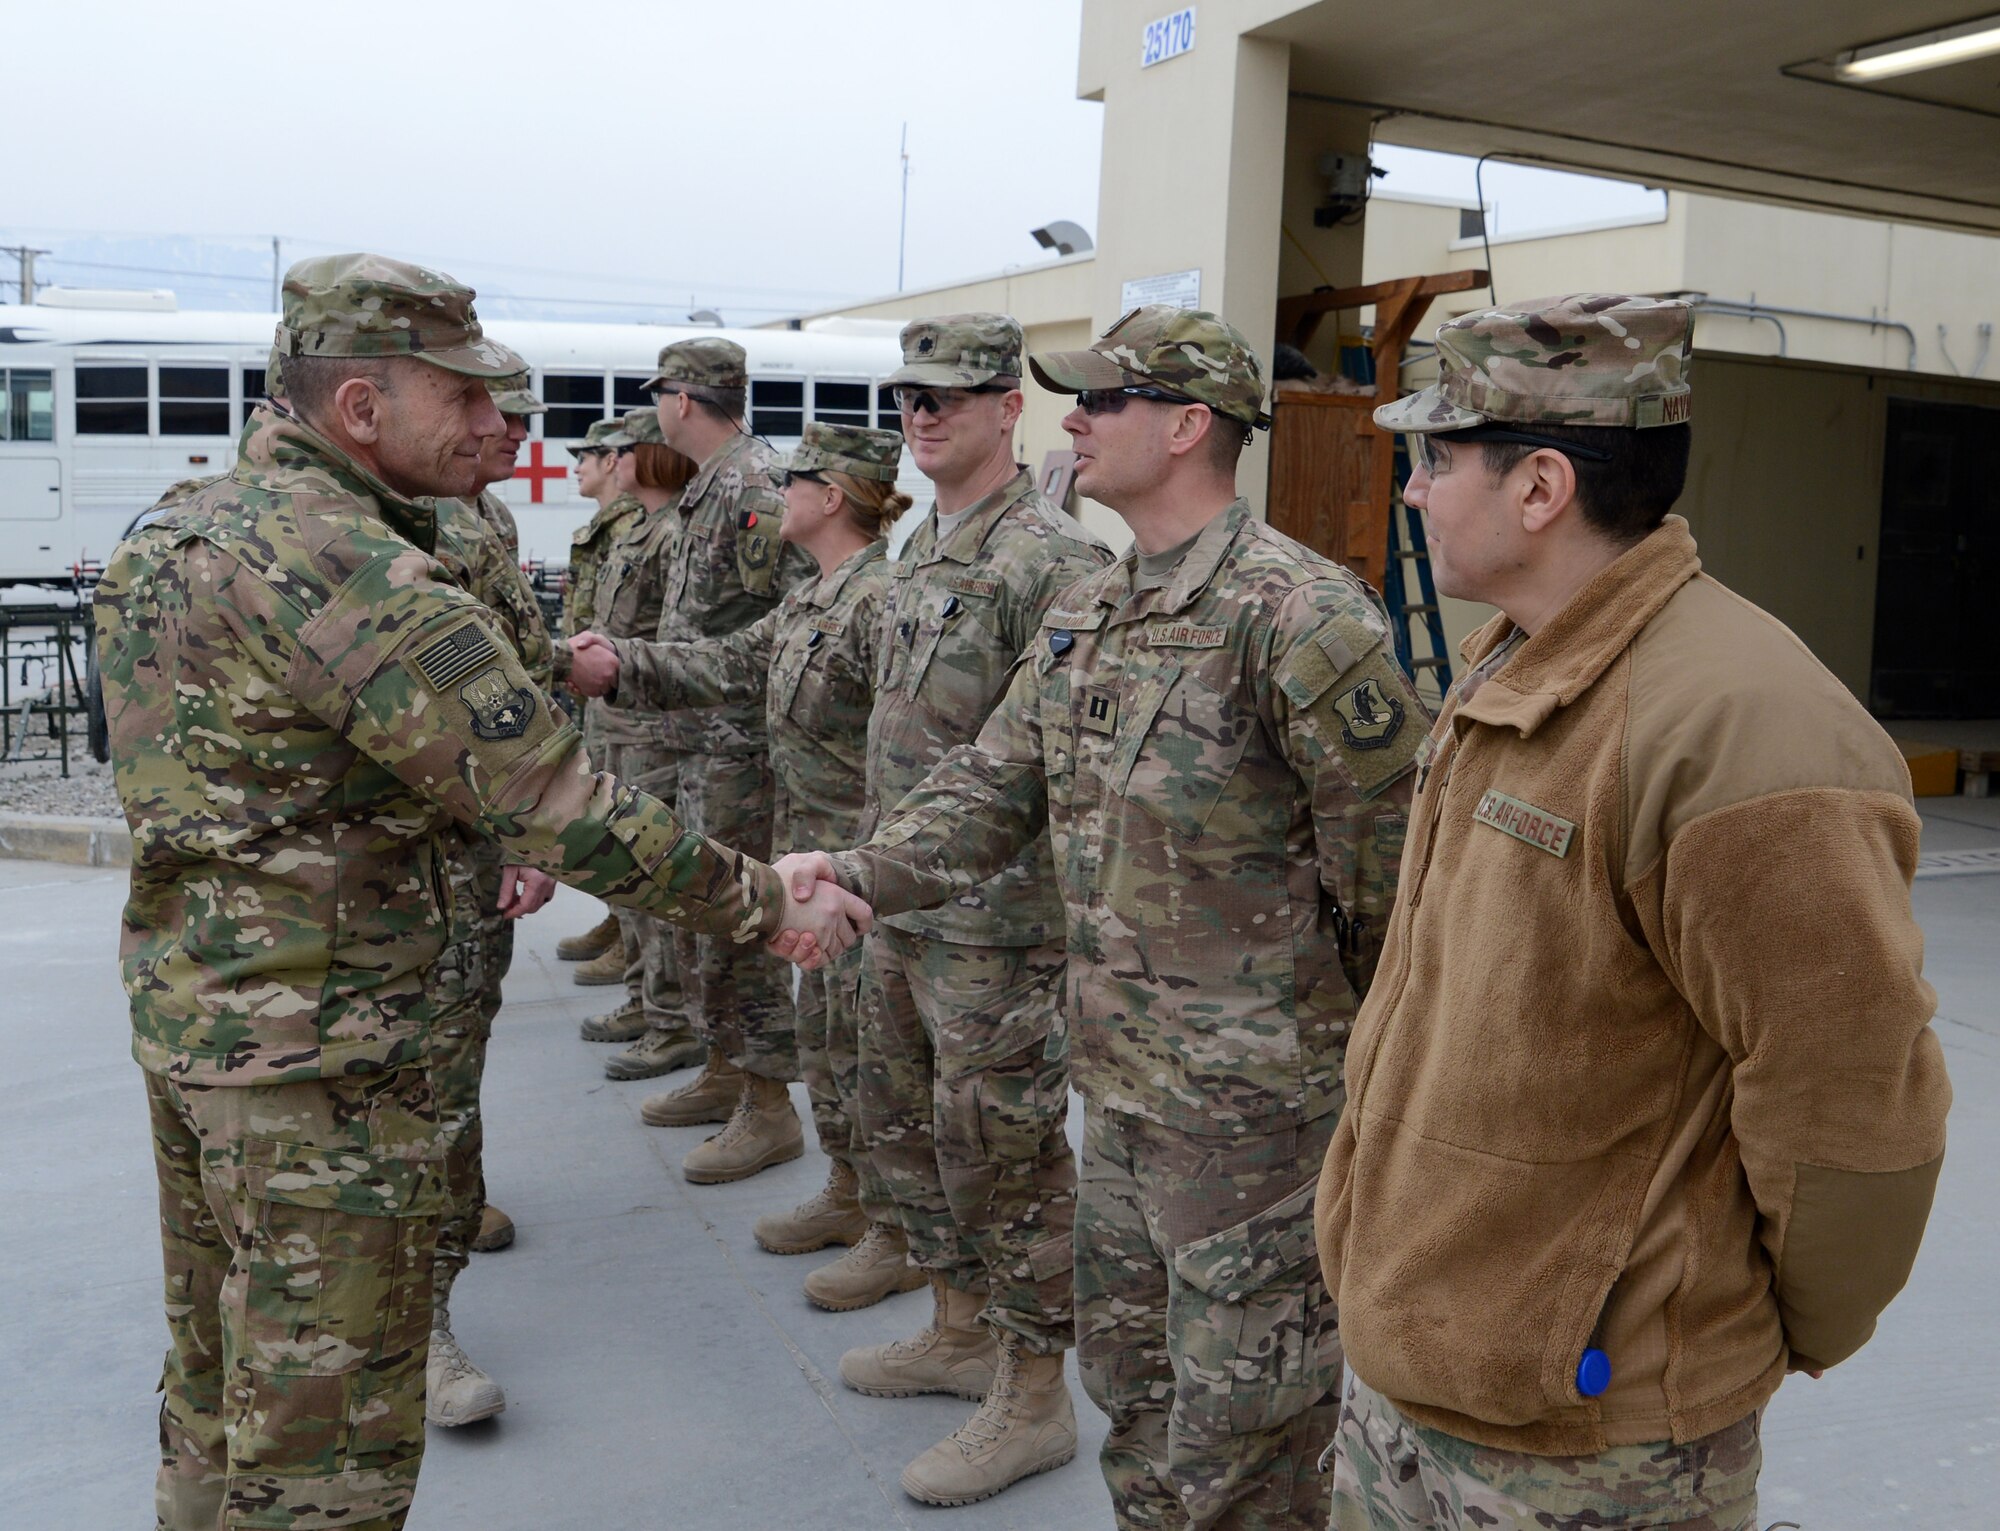 Gen. Mike Holmes, commander of Air Combat Command, visits Airmen from the 455th Air Expeditionary Wing Feb. 9, 2018 at Bagram Airfield, Afghanistan.